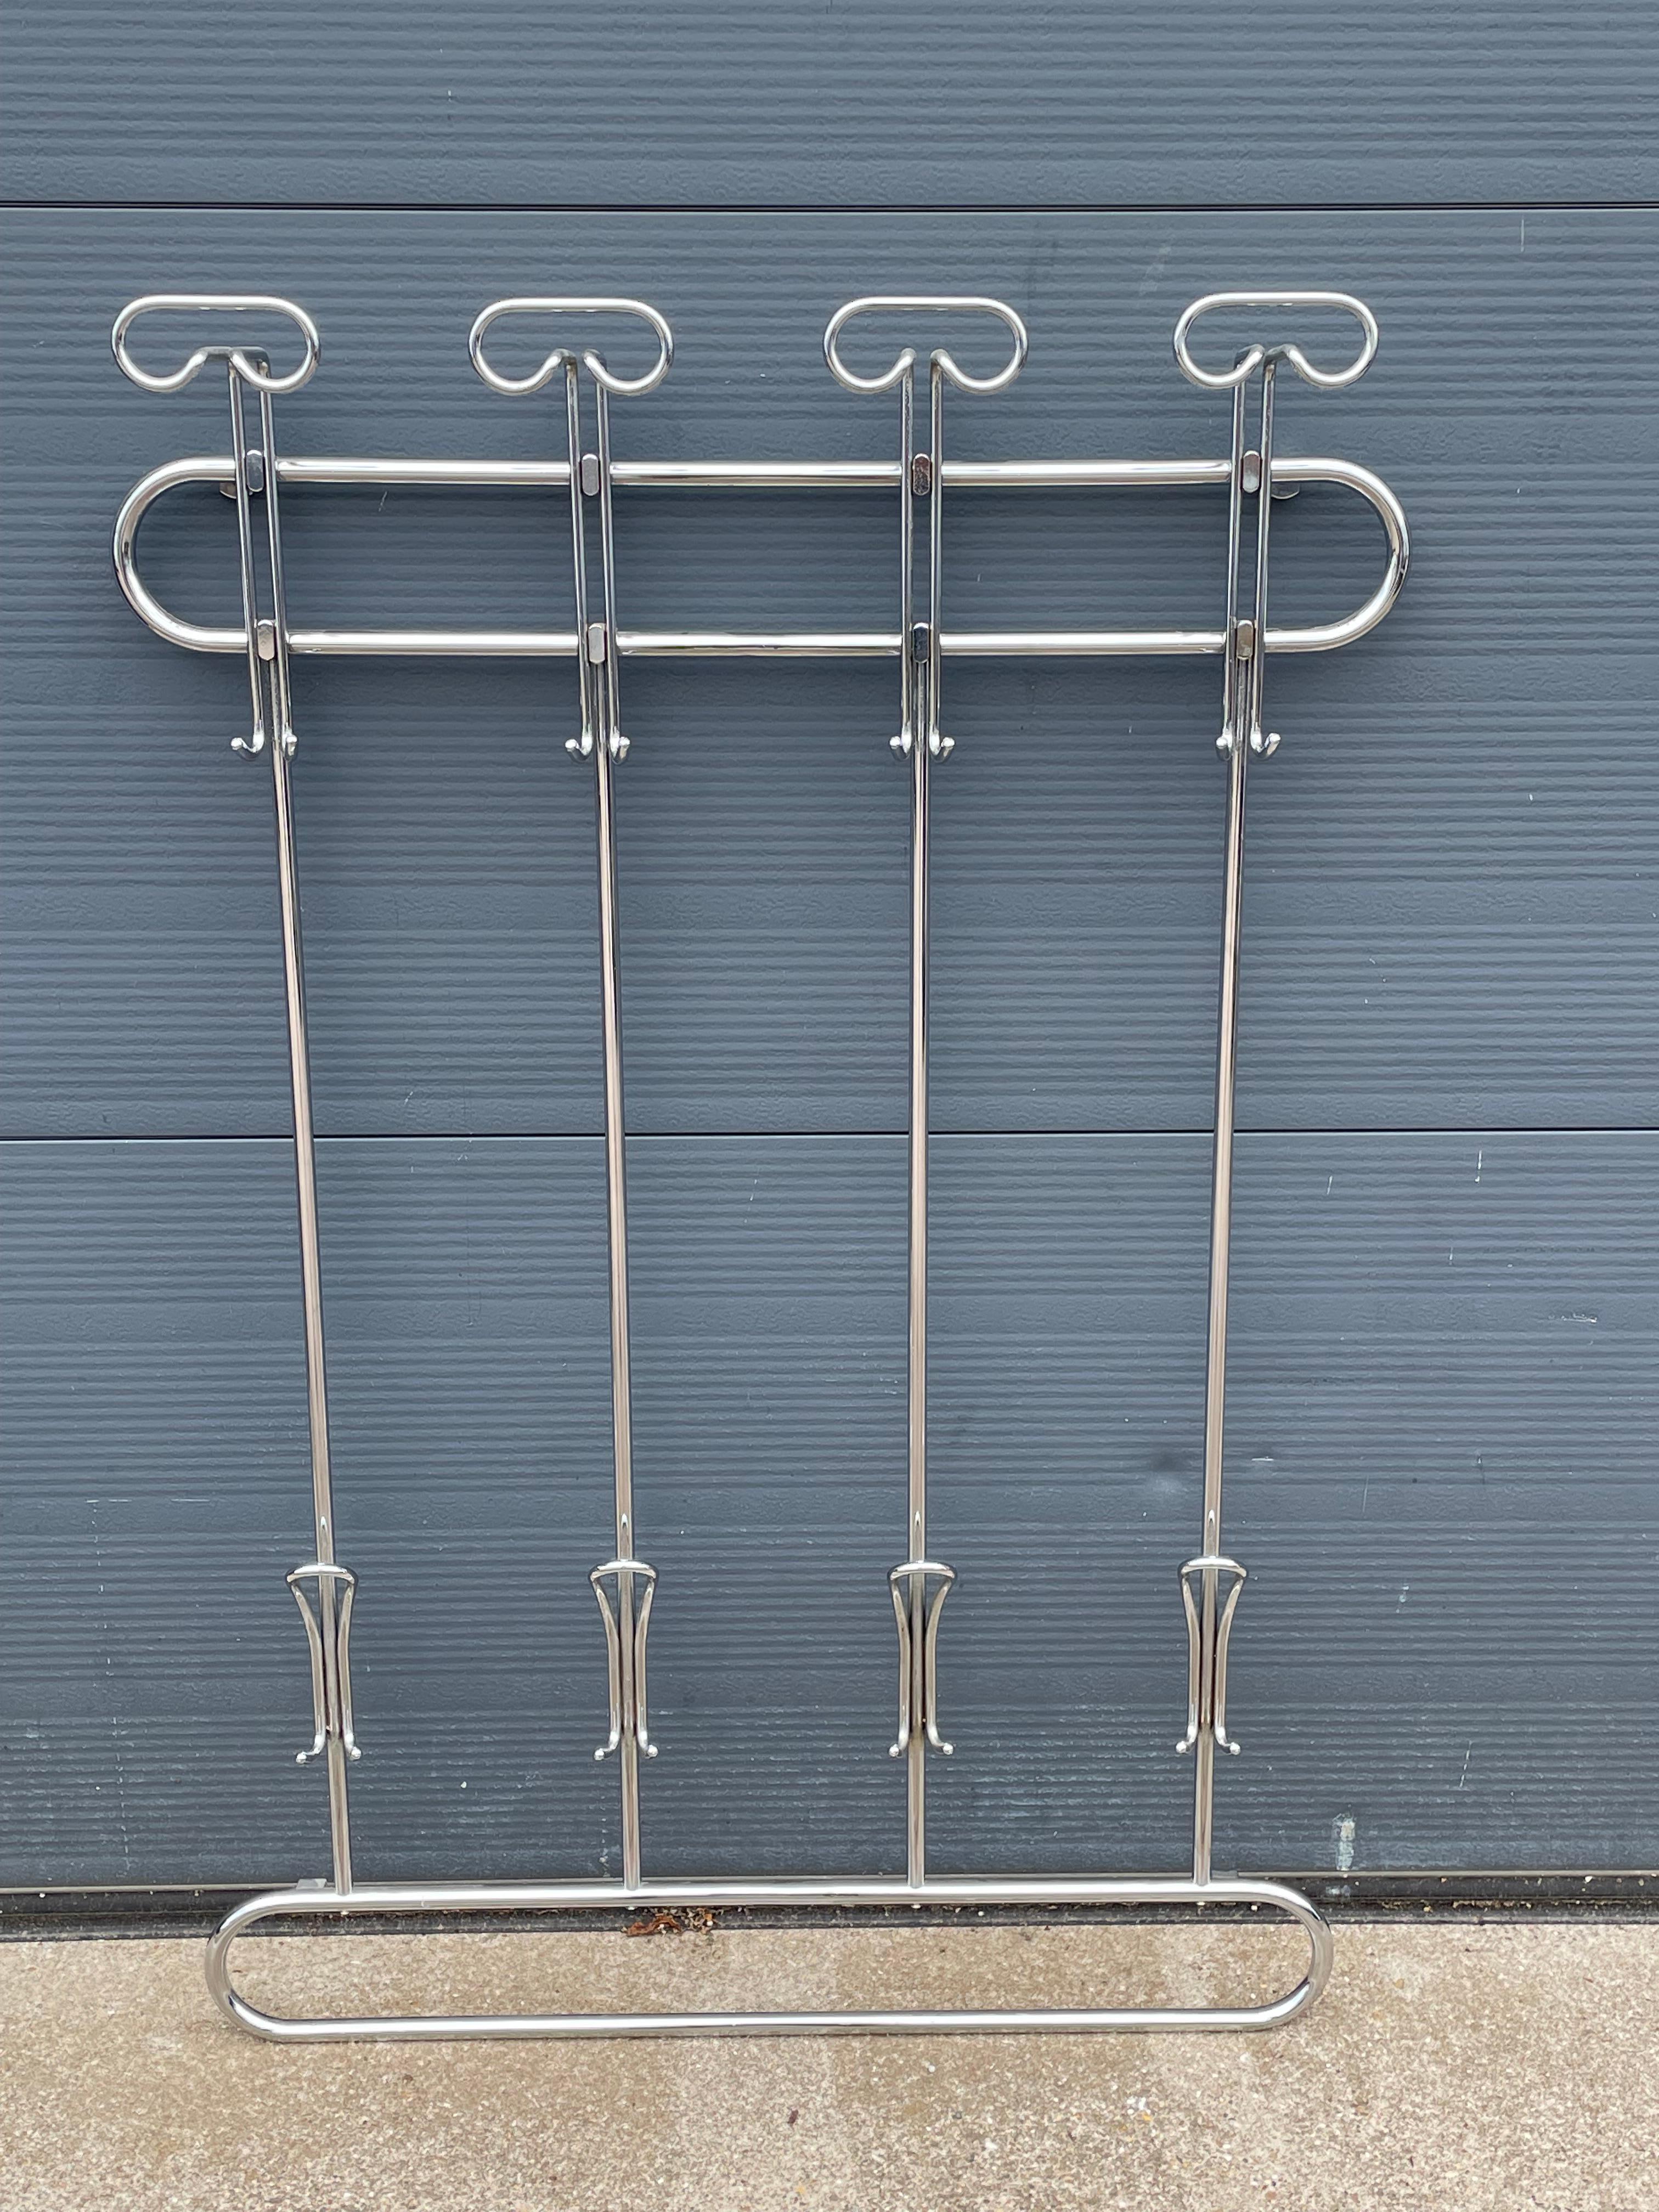 Great looking 1970s Bauhaus design wall coat rack with a rare & matching Hustadt flushmount.

We recently 'salvaged' this timeless and highly stylish, midcentury modern design set from the home of the first owner of this set (in Germany). It is